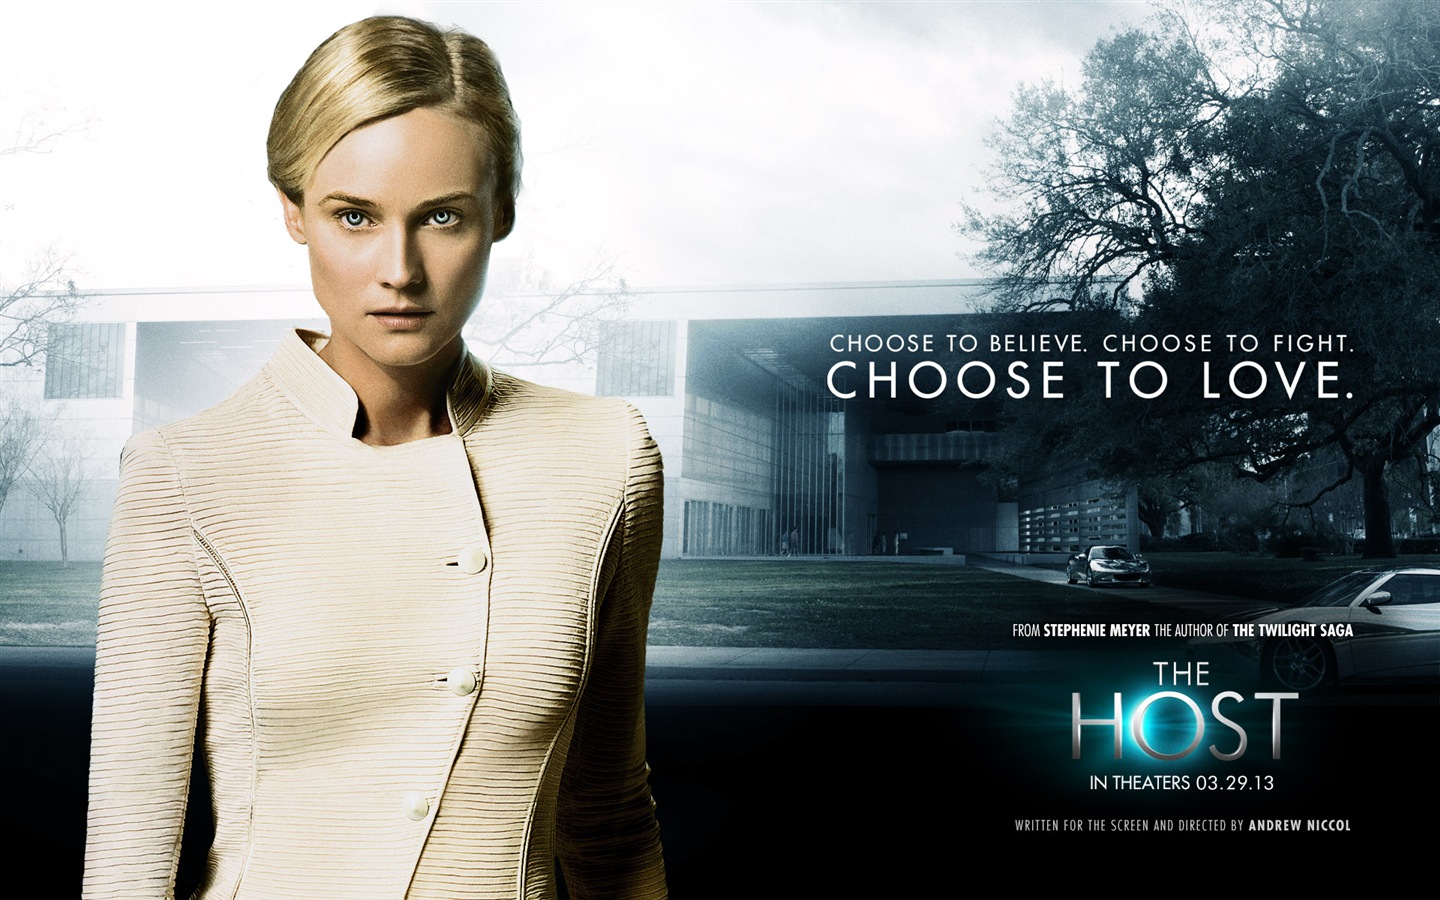 The Host 2013 movie HD wallpapers #19 - 1440x900